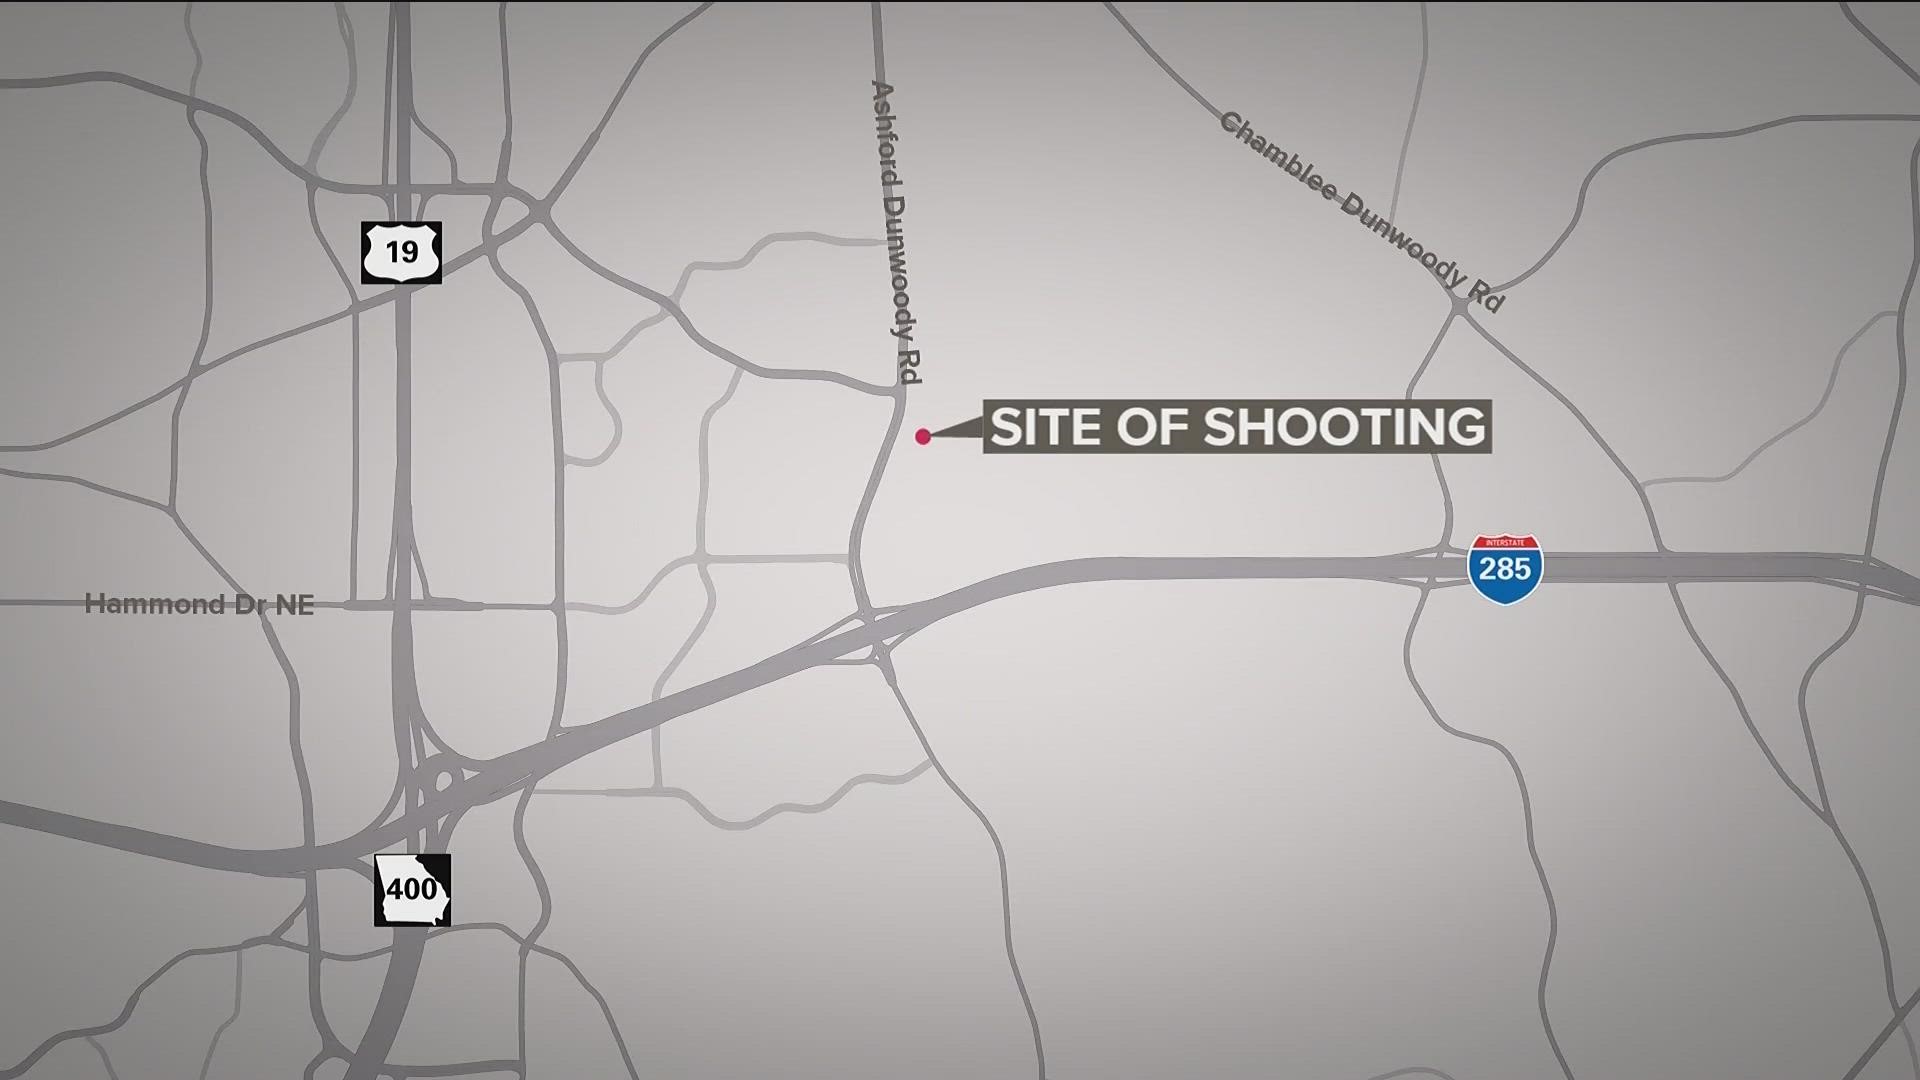 A security guard was shot in the arm Saturday night after a couple tried to leave a restaurant without paying their tab, Dunwoody Police said.